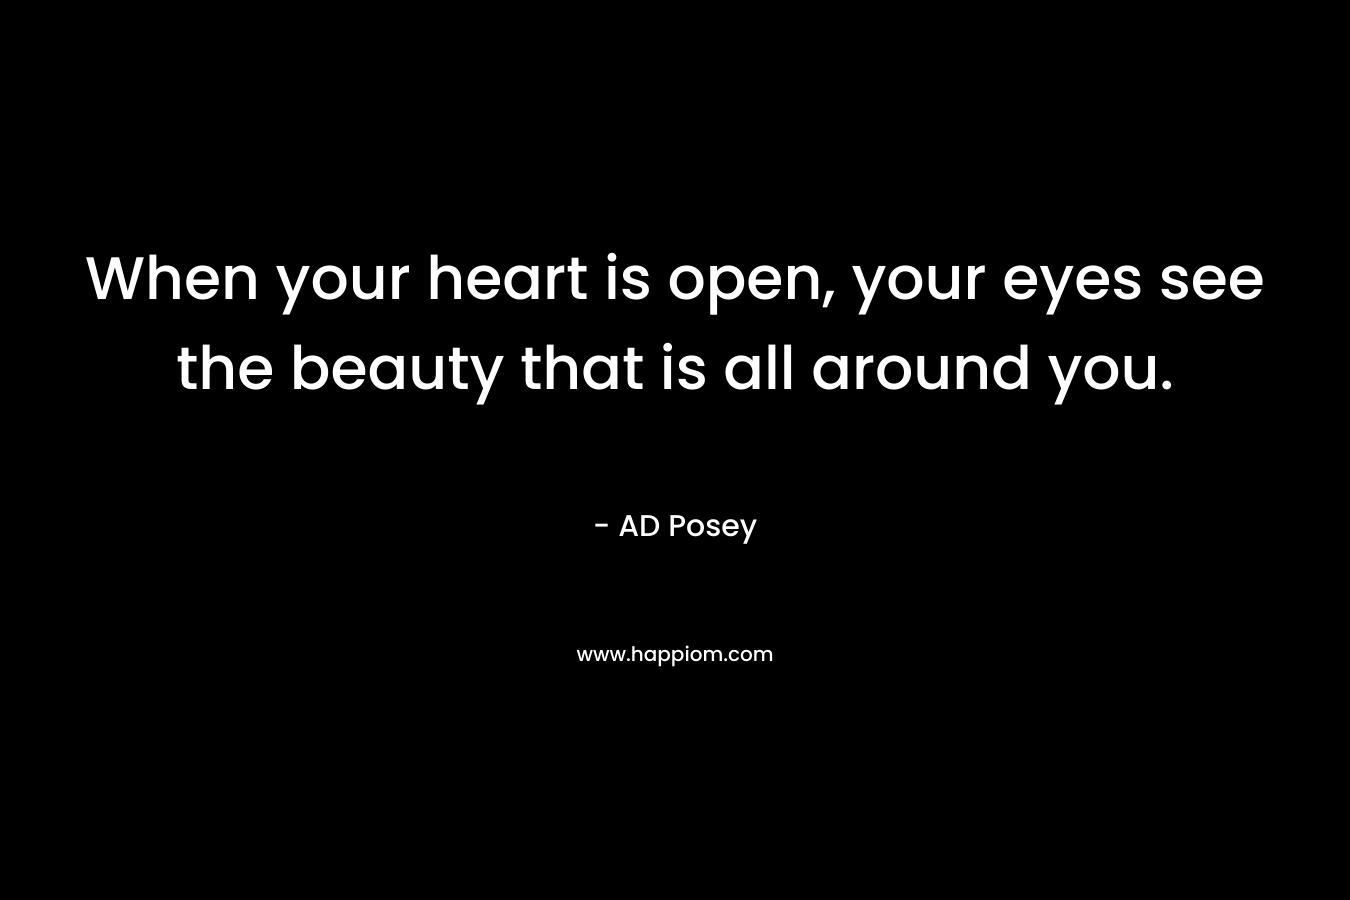 When your heart is open, your eyes see the beauty that is all around you.